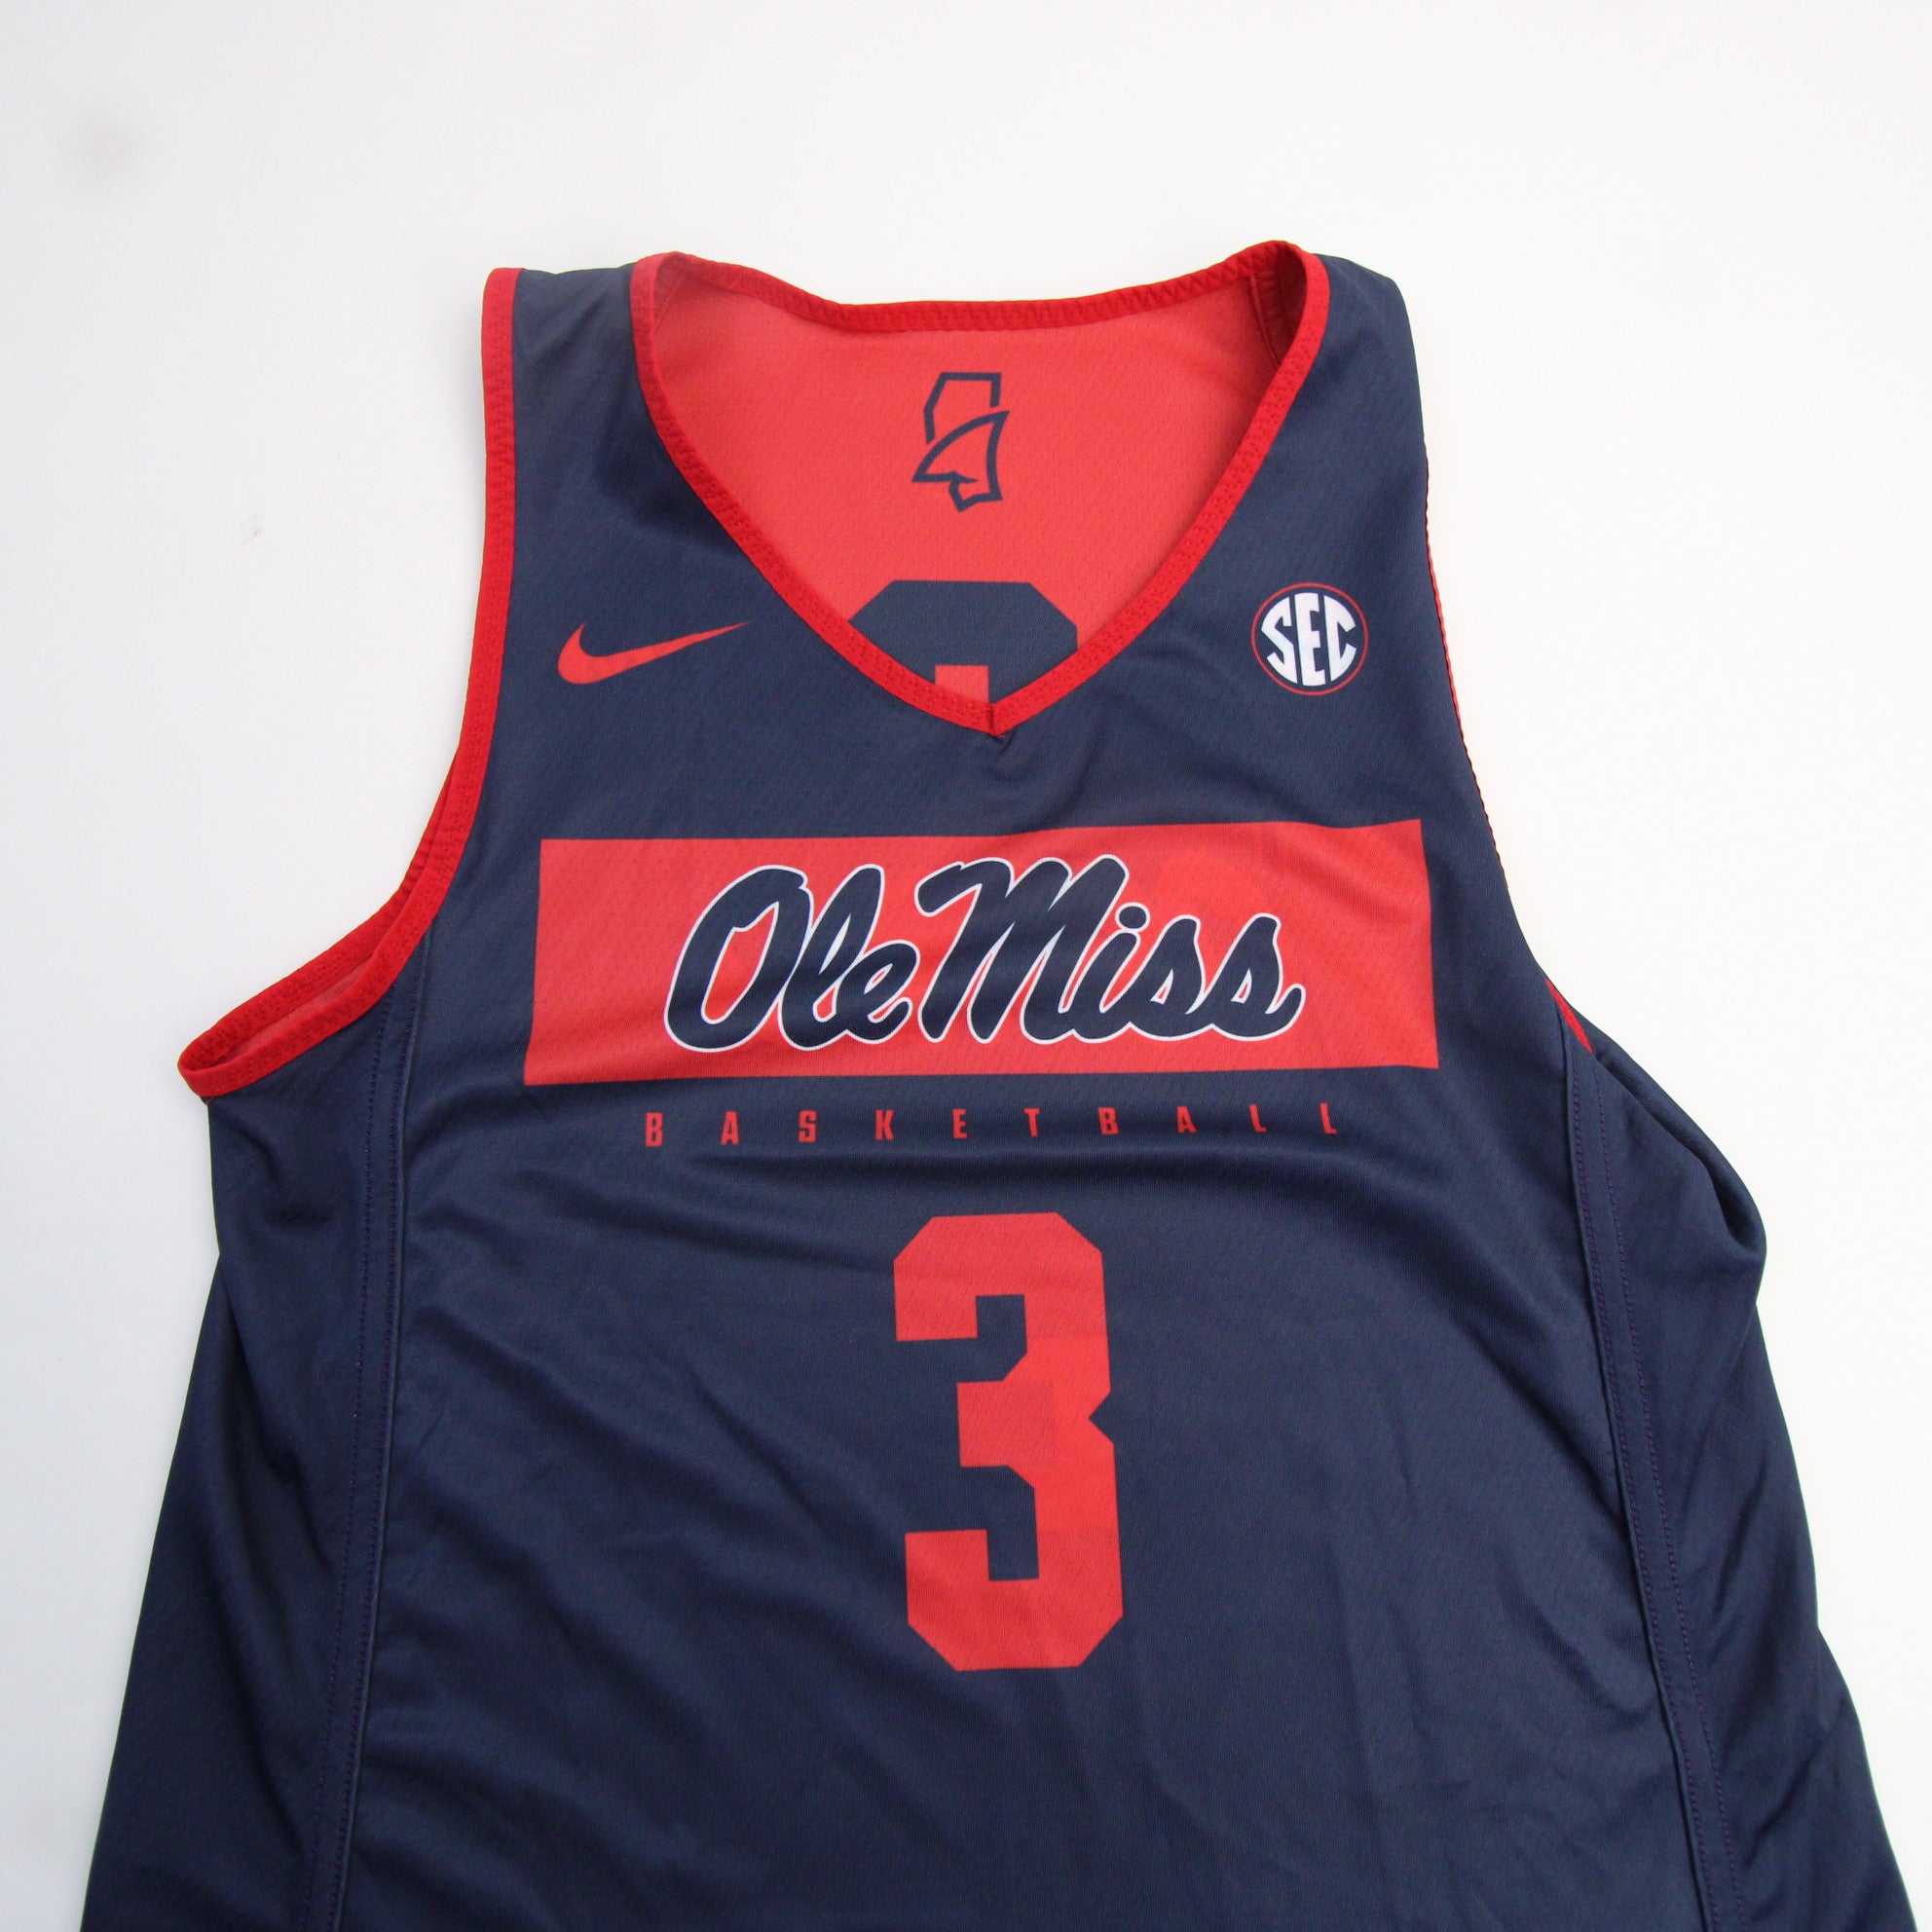 Ole Miss Rebels Jersey Name and Number Customizable College Basketball Jerseys Replica Navy